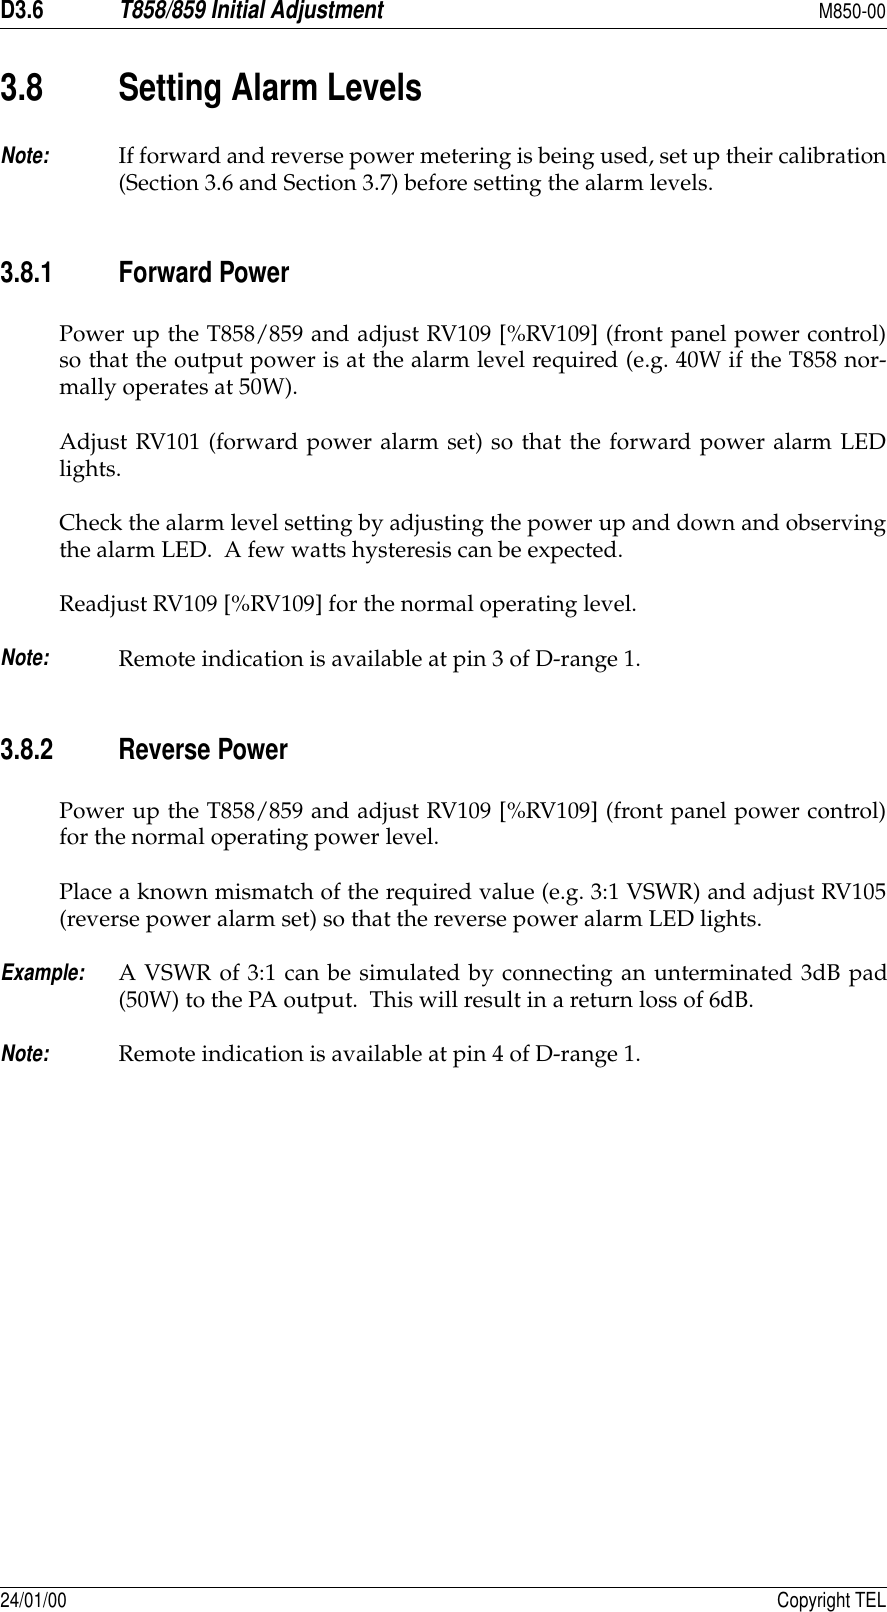 D3.6T858/859 Initial AdjustmentM850-0024/01/00 Copyright TEL3.8 Setting Alarm LevelsNote:If forward and reverse power metering is being used, set up their calibration(Section 3.6 and Section 3.7) before setting the alarm levels.3.8.1 Forward PowerPower up the T858/859 and adjust RV109 [%RV109] (front panel power control)so that the output power is at the alarm level required (e.g. 40W if the T858 nor-mally operates at 50W).Adjust RV101 (forward power alarm set) so that the forward power alarm LEDlights.Check the alarm level setting by adjusting the power up and down and observingthe alarm LED.  A few watts hysteresis can be expected.Readjust RV109 [%RV109] for the normal operating level.Note:Remote indication is available at pin 3 of D-range 1.3.8.2 Reverse PowerPower up the T858/859 and adjust RV109 [%RV109] (front panel power control)for the normal operating power level.Place a known mismatch of the required value (e.g. 3:1 VSWR) and adjust RV105(reverse power alarm set) so that the reverse power alarm LED lights.Example:A VSWR of 3:1 can be simulated by connecting an unterminated 3dB pad(50W) to the PA output.  This will result in a return loss of 6dB.Note:Remote indication is available at pin 4 of D-range 1.